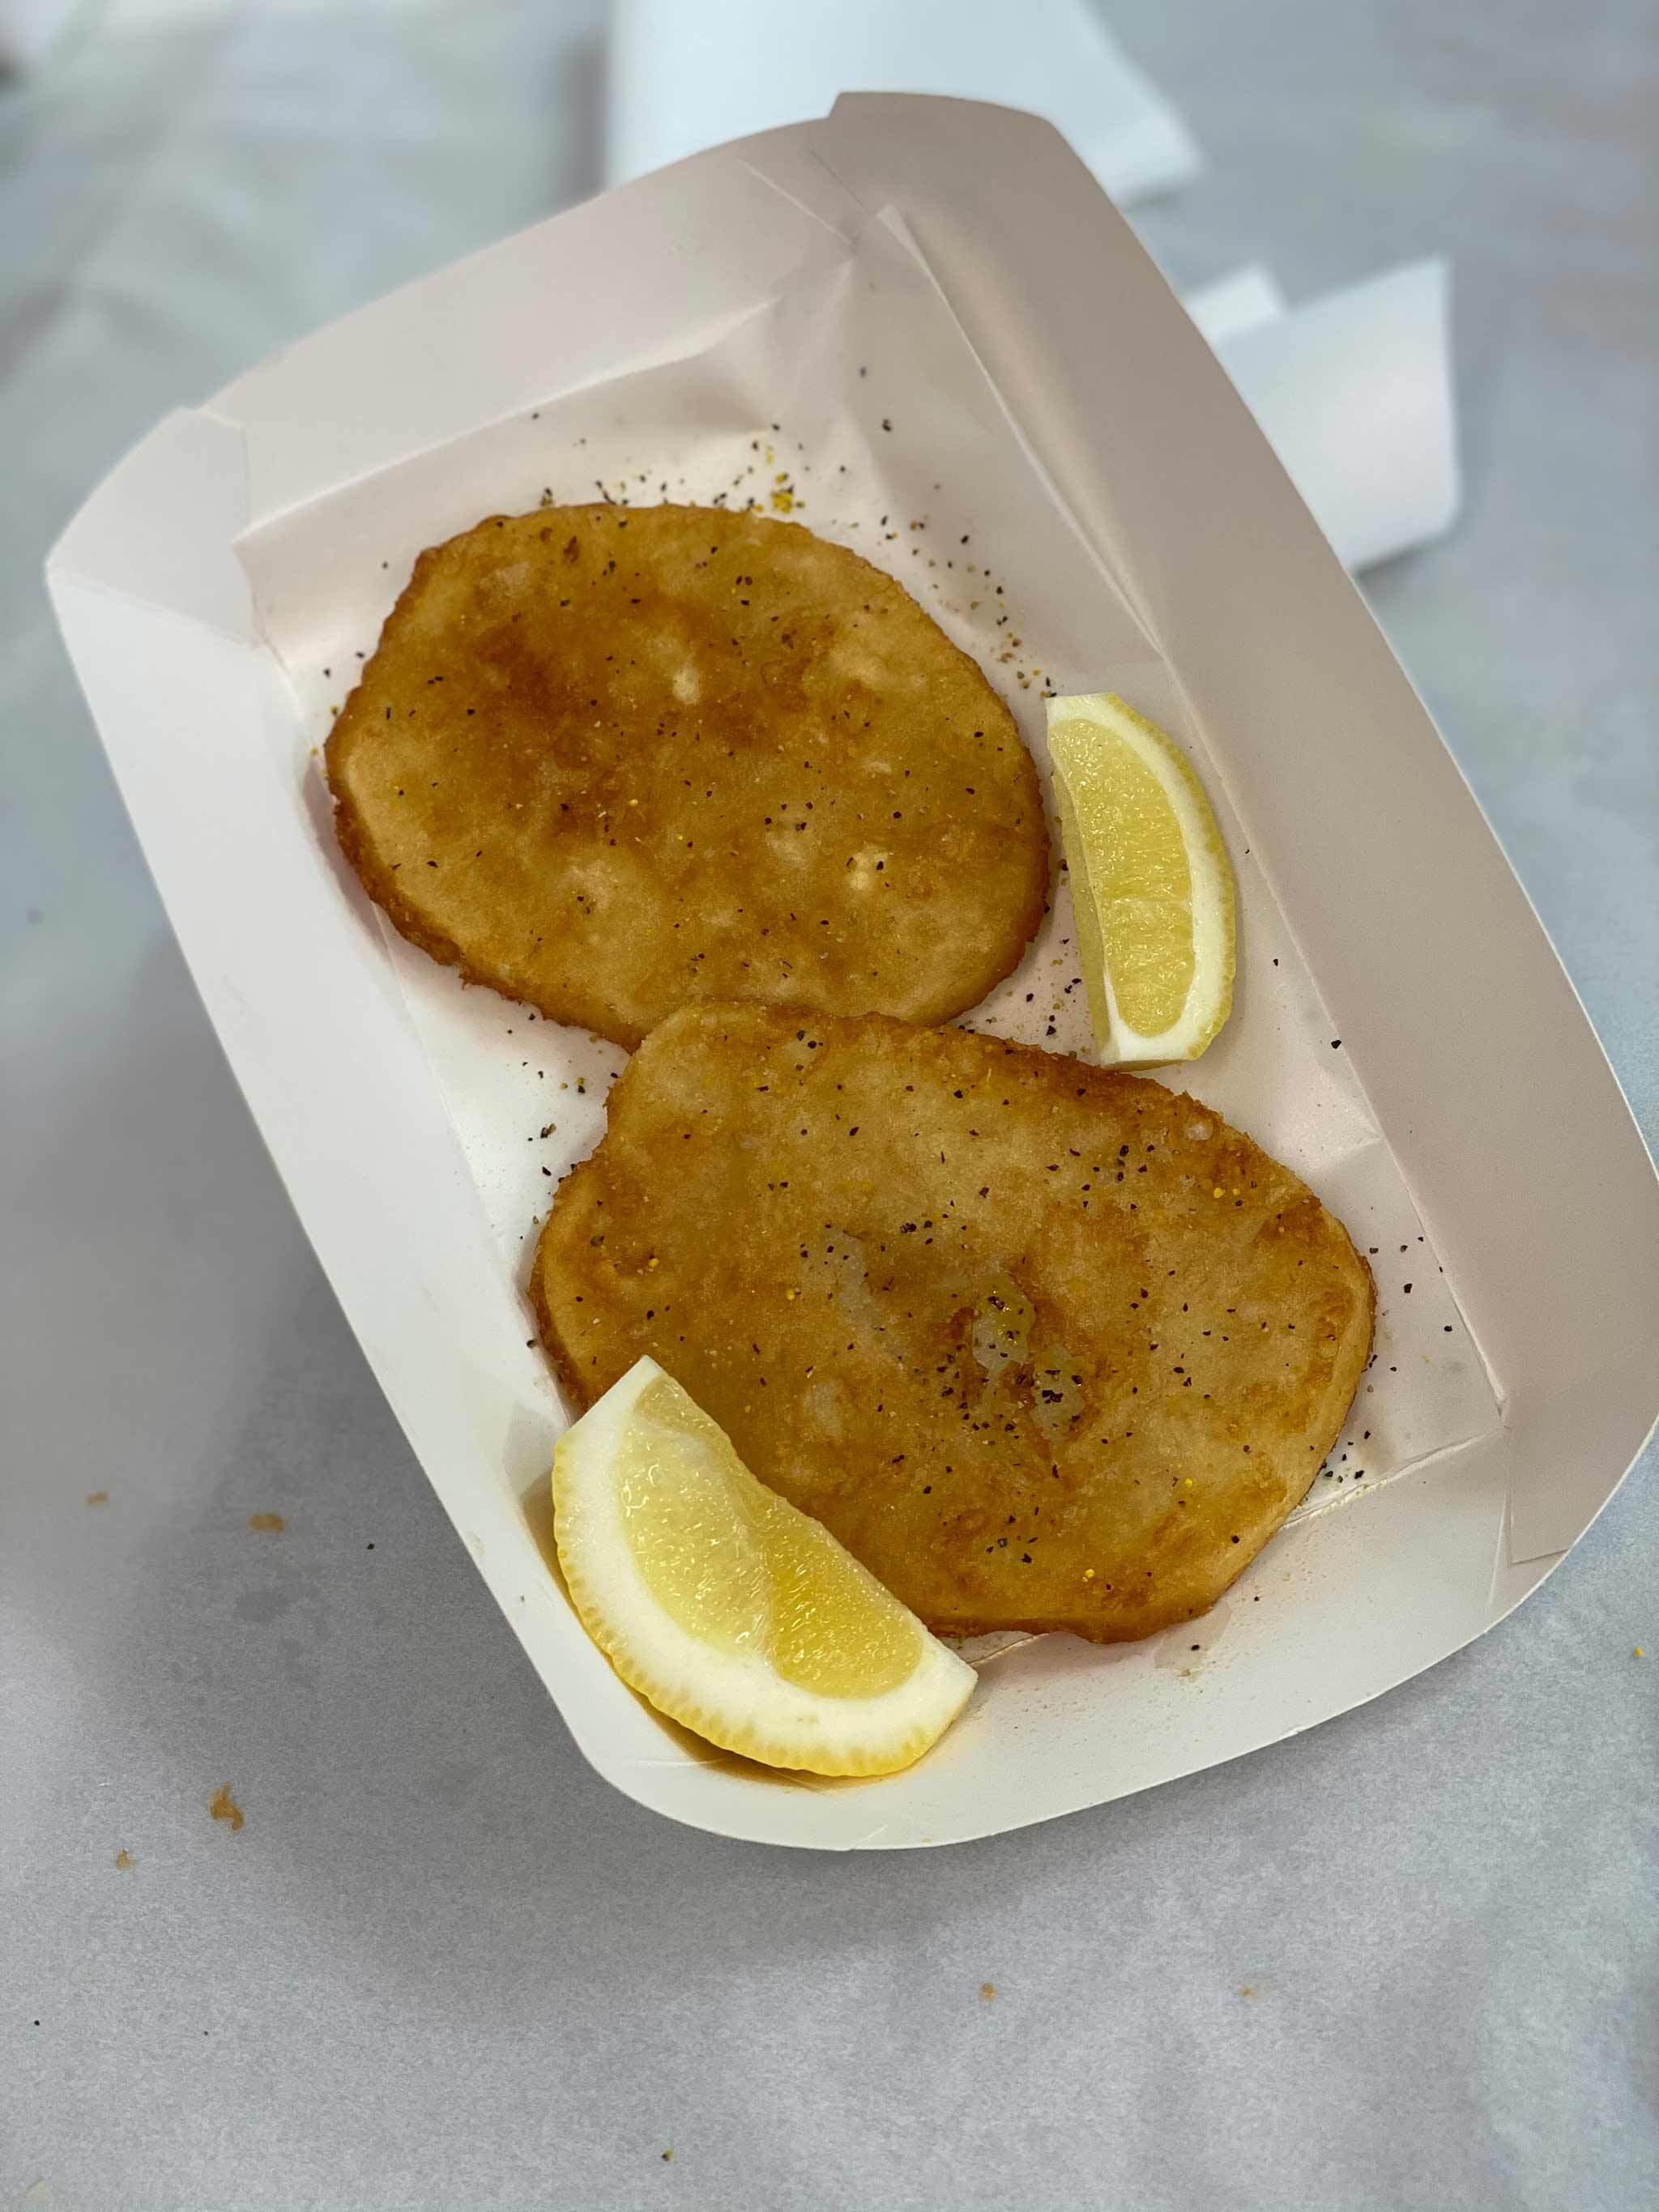 Photo of two potato fritters in a cardboard tray with two slices of lemon.